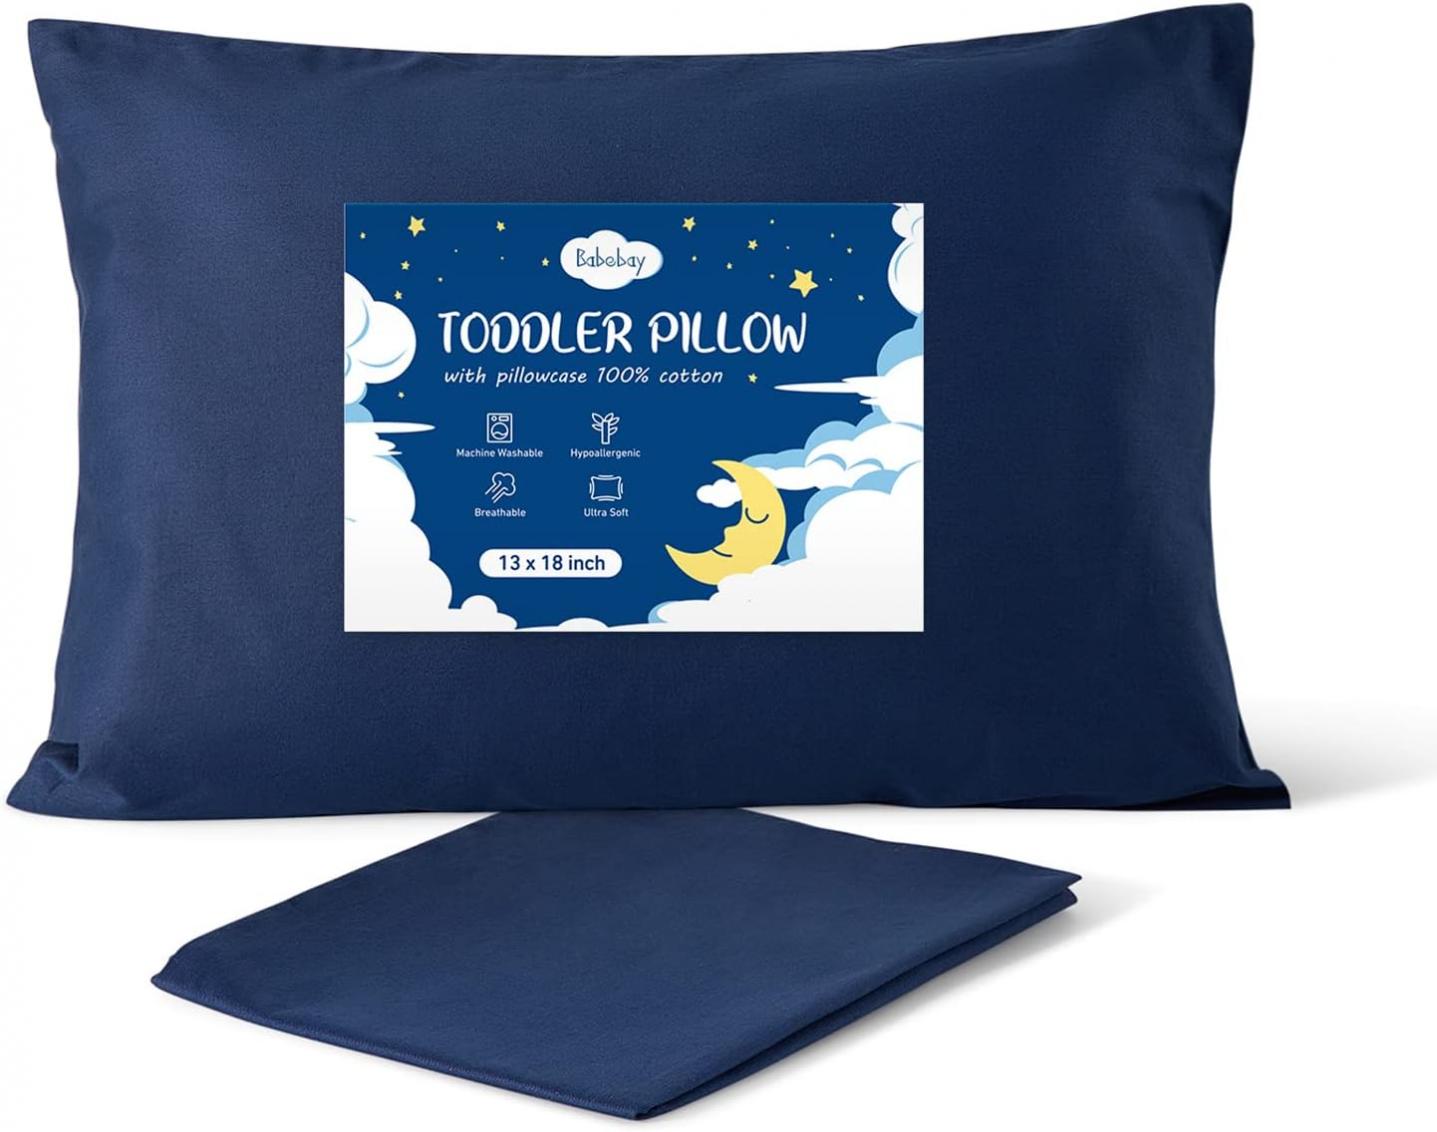 Babebay Toddler Pillow with Pillowcase, 13×18 100% Cotton Toddlers Pillows for Sleeping, Machine Washable Pillows Perfect for Toddler Bed, Daycare, Small Pillows for Kids, Neutral - Navy Blue